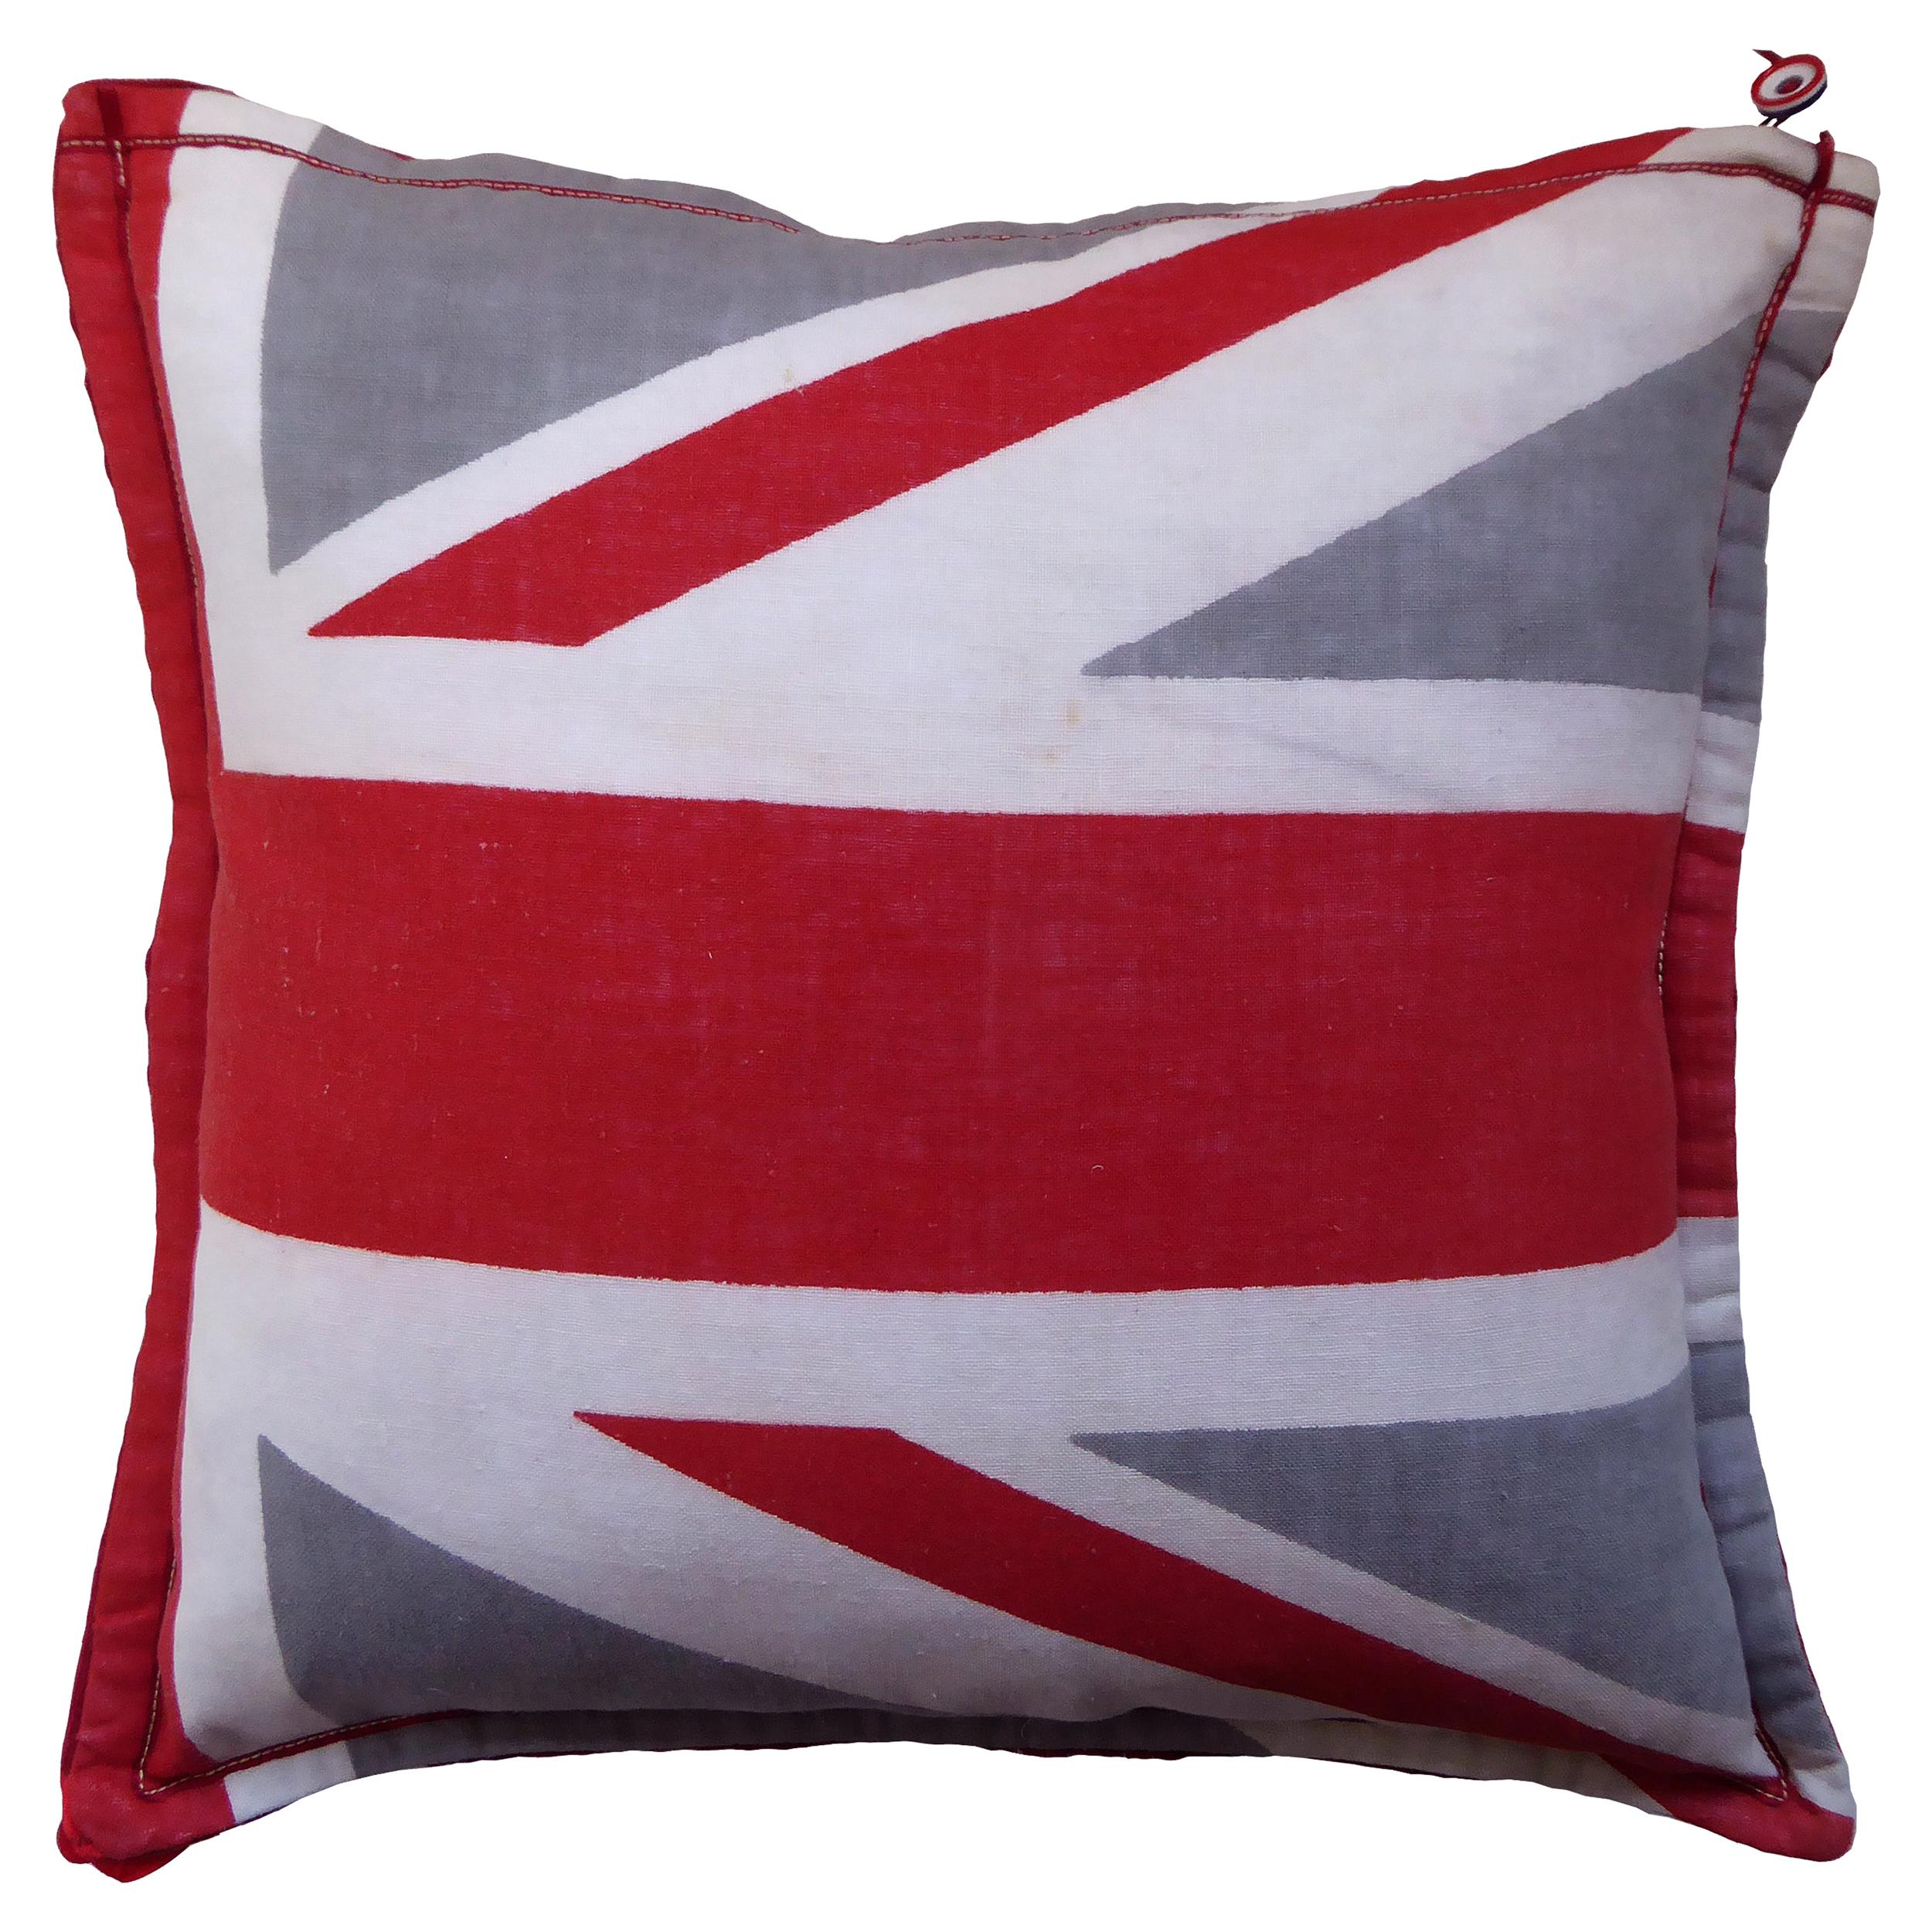 'Vintage Cushions' Bespoke-Made Pillow 'Distressed Union Jack Flag, Made in UK